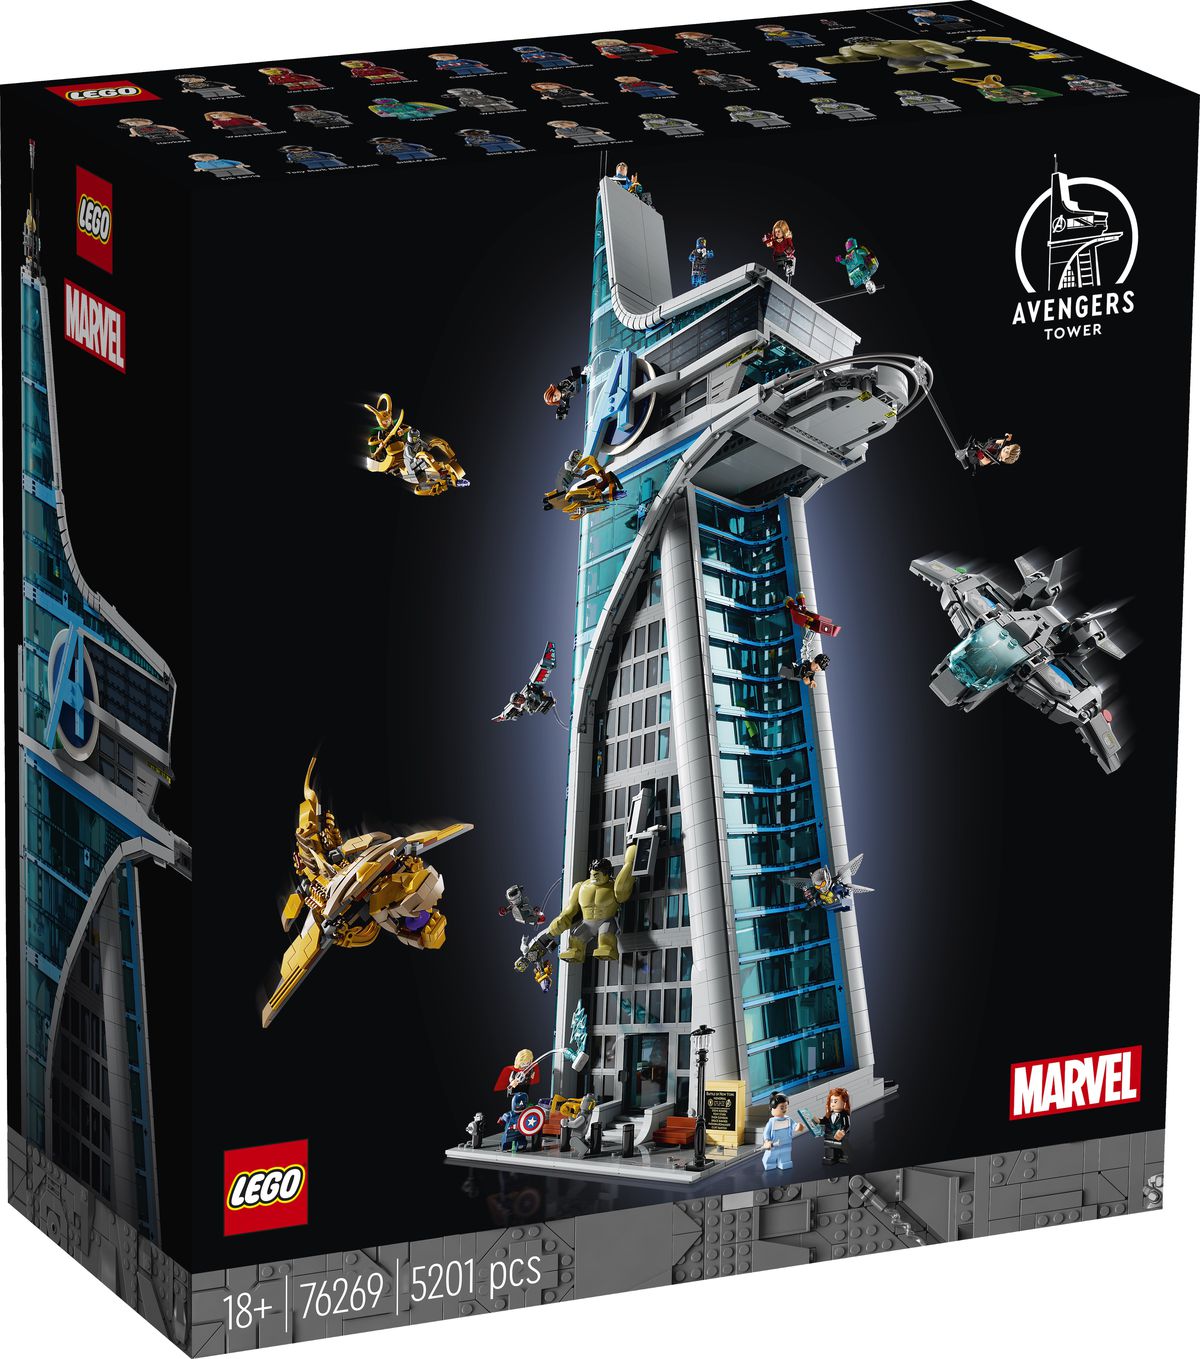 A box shot of Lego Avengers Tower, showing various Avengers and Chitauri forces battling on the exterior